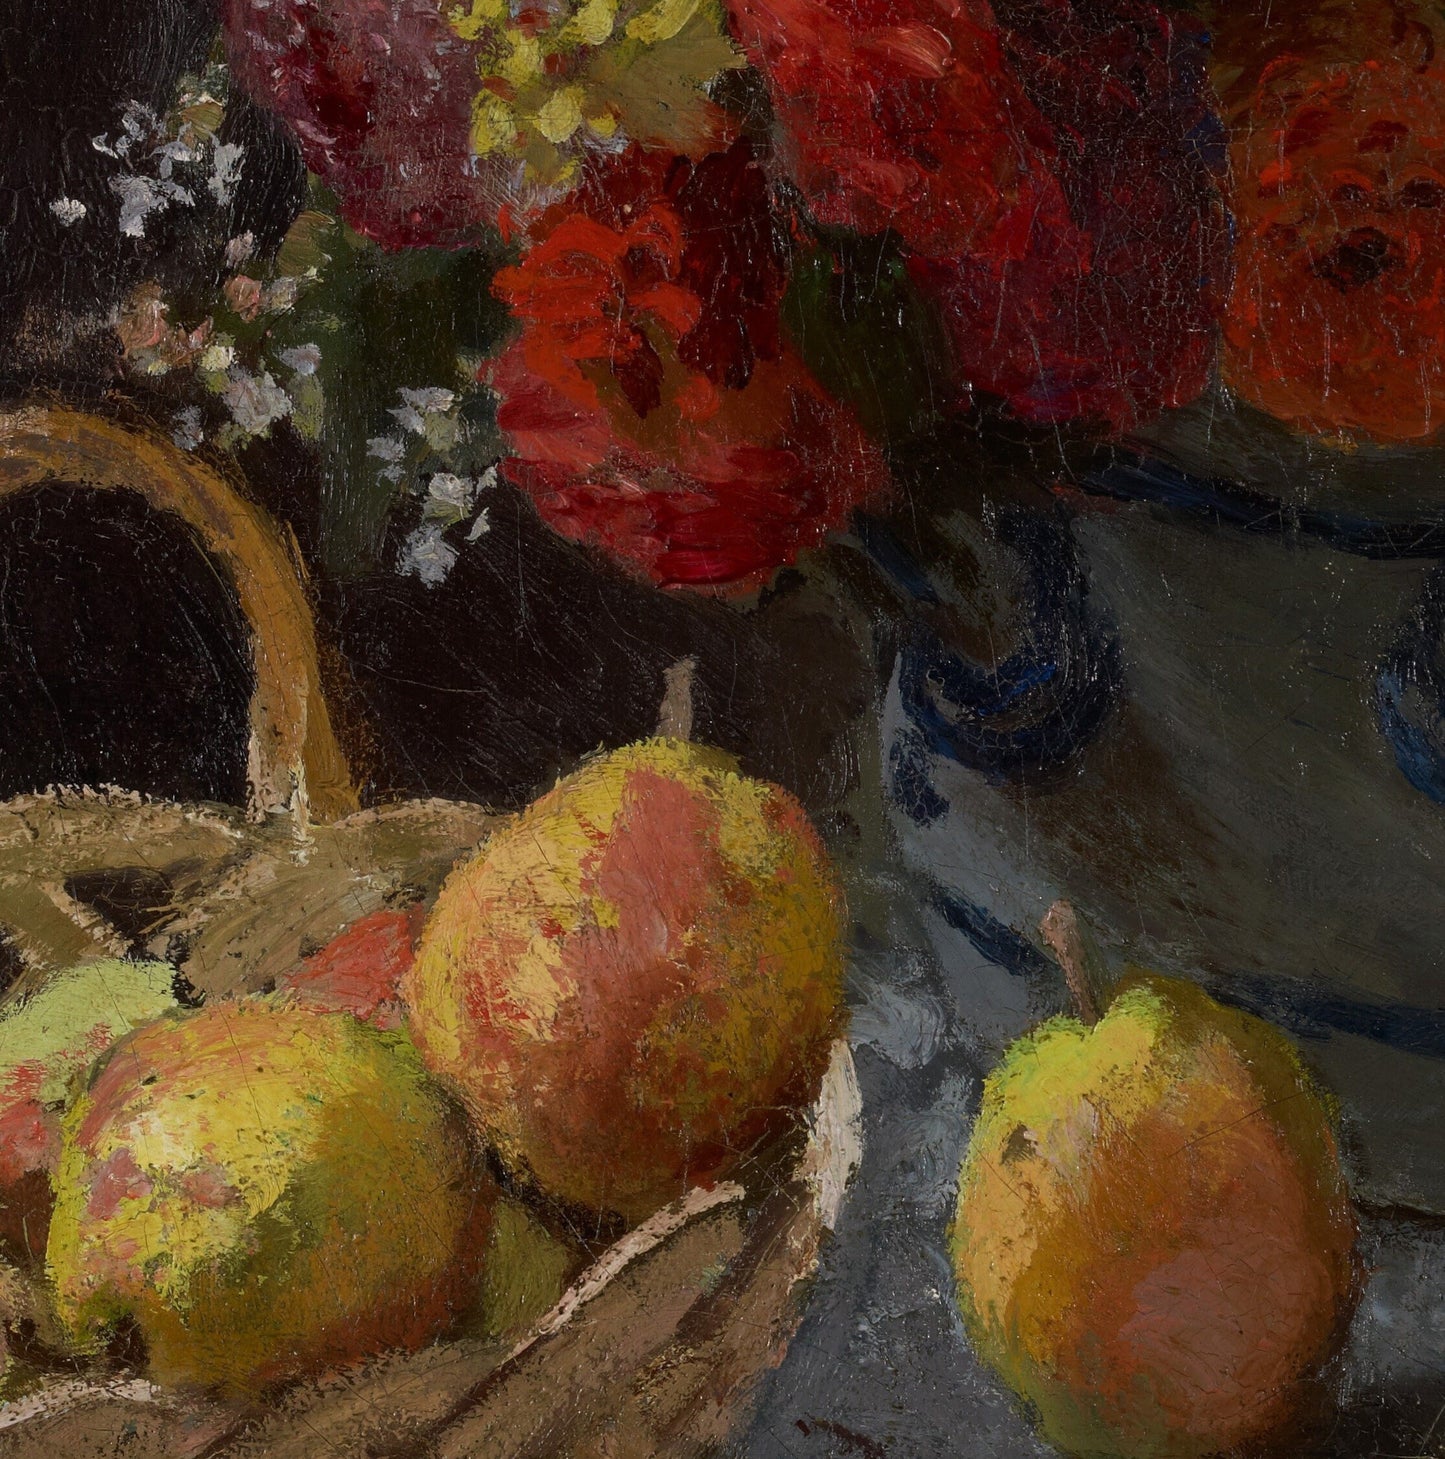 Still Life with Flowers and Fruit by Claude Monet, 3d Printed with texture and brush strokes looks like original oil-painting, code:009